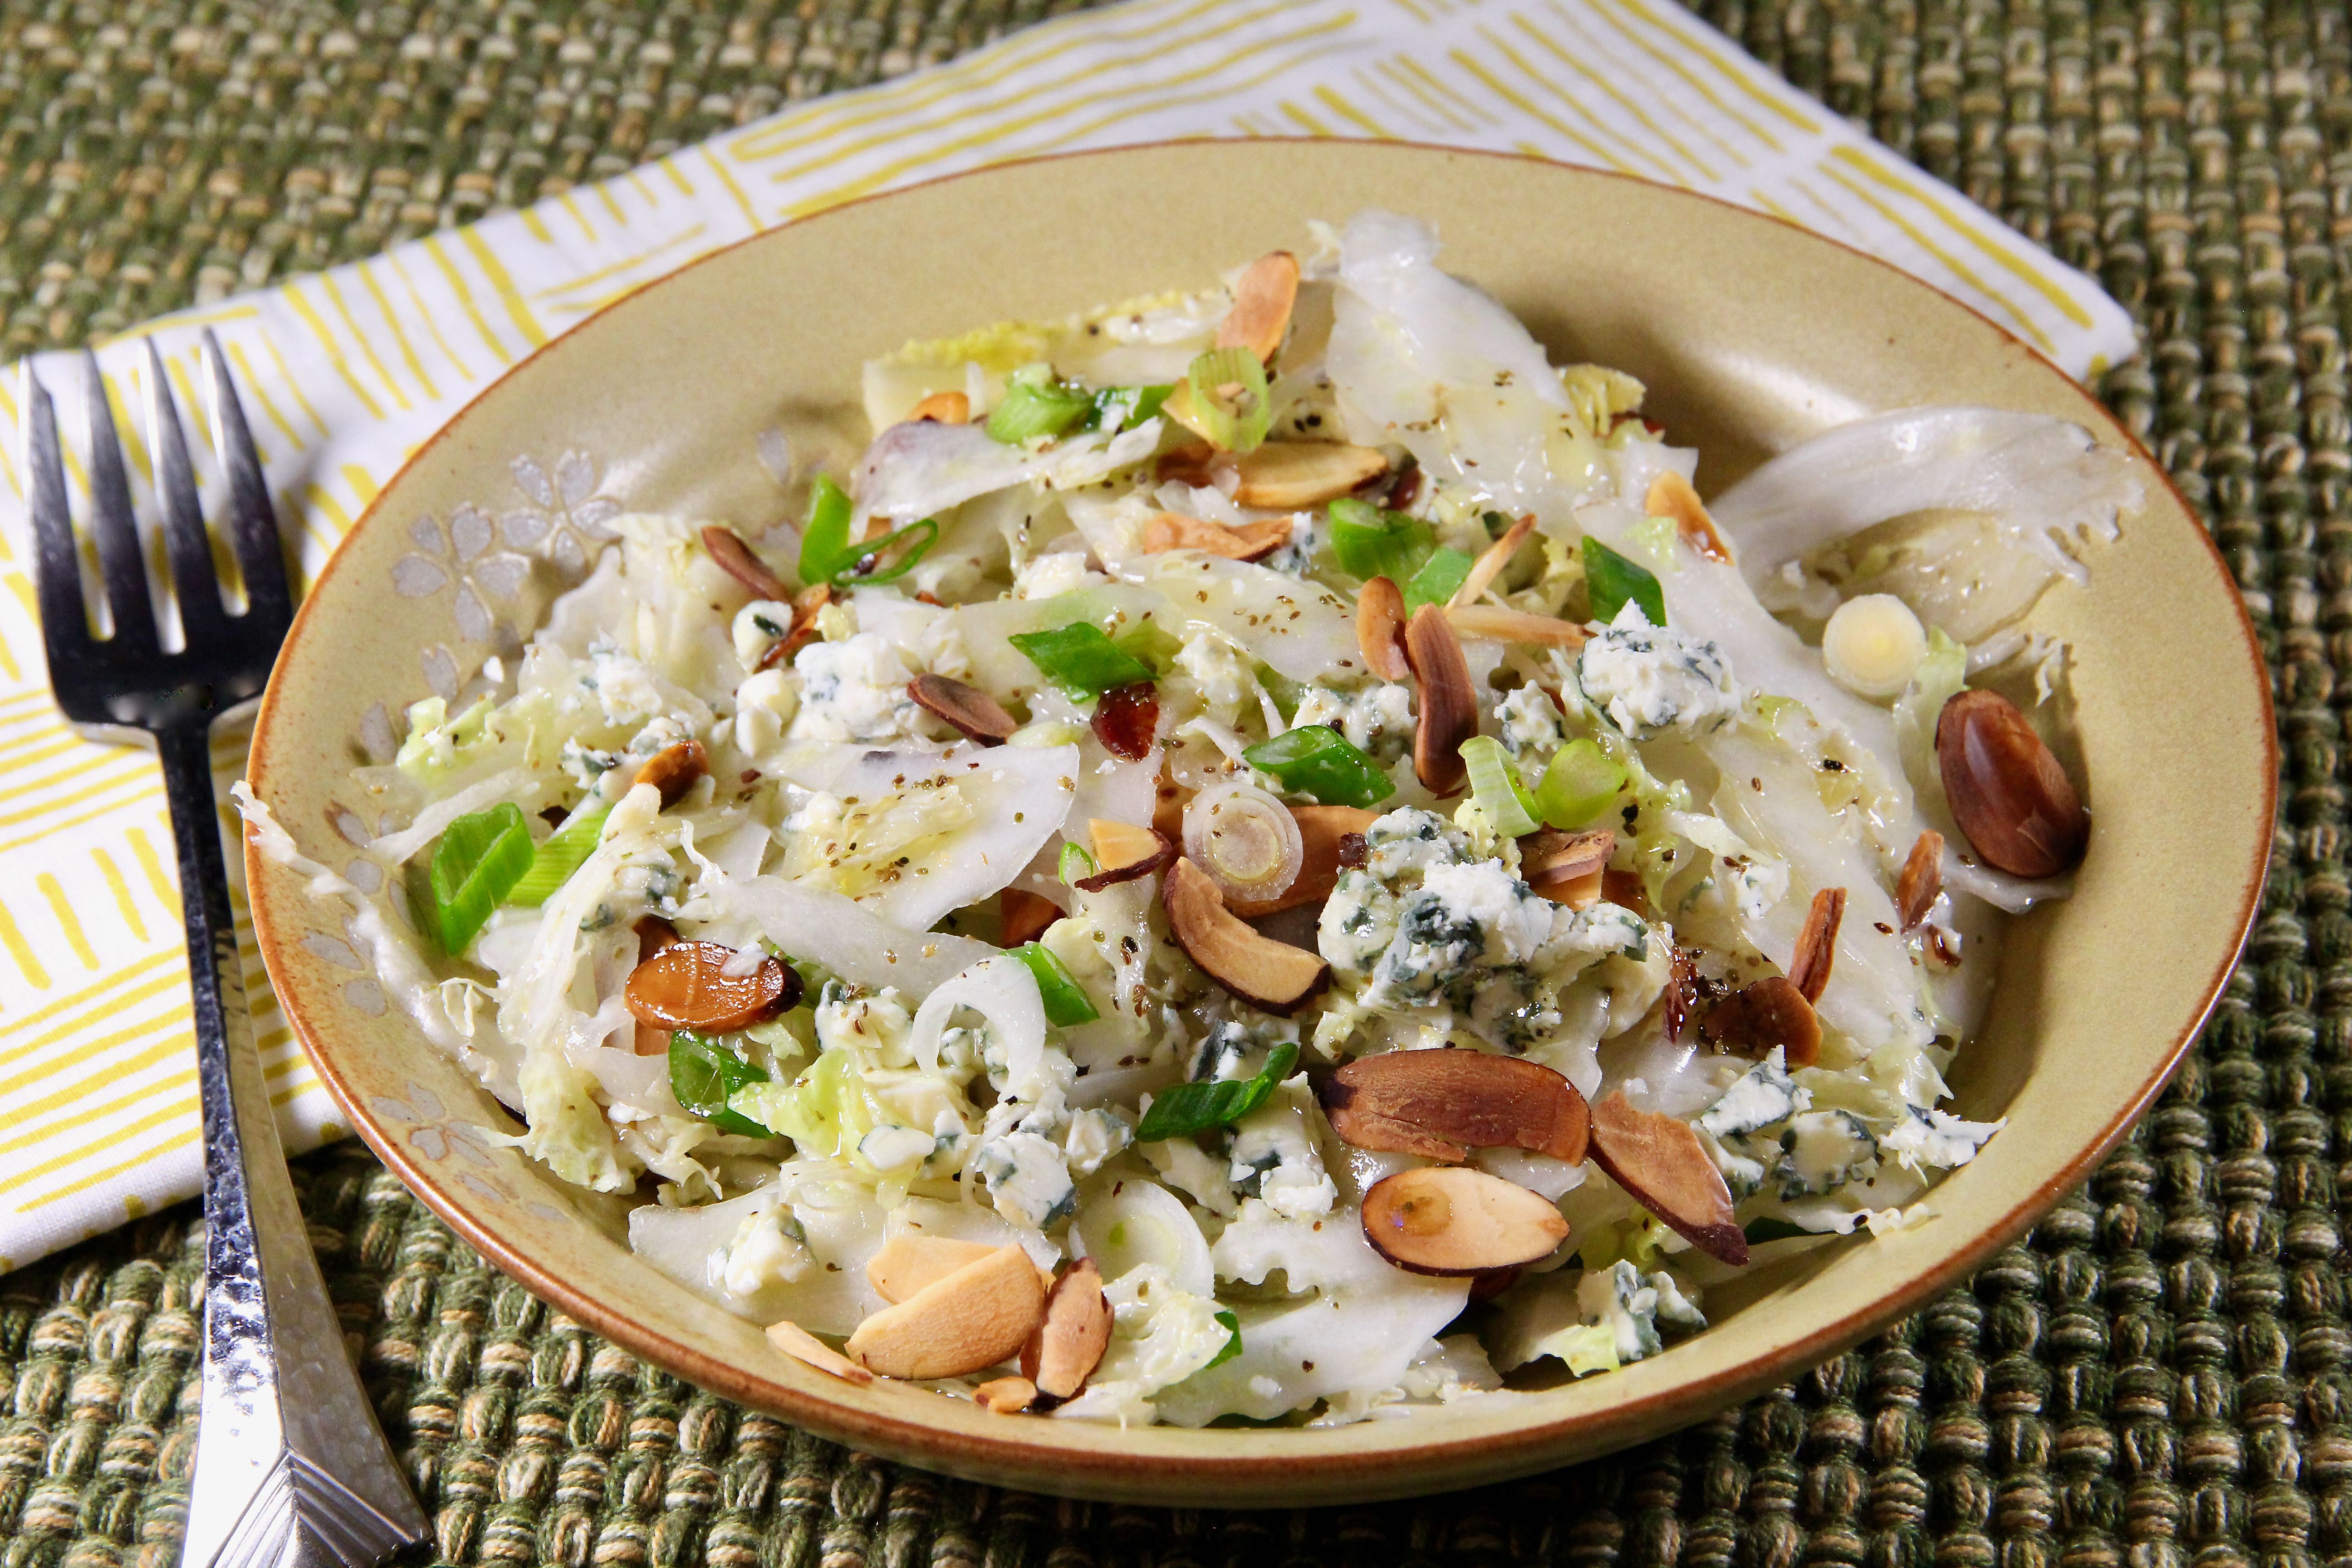 Napa Cabbage Salad with Blue Cheese